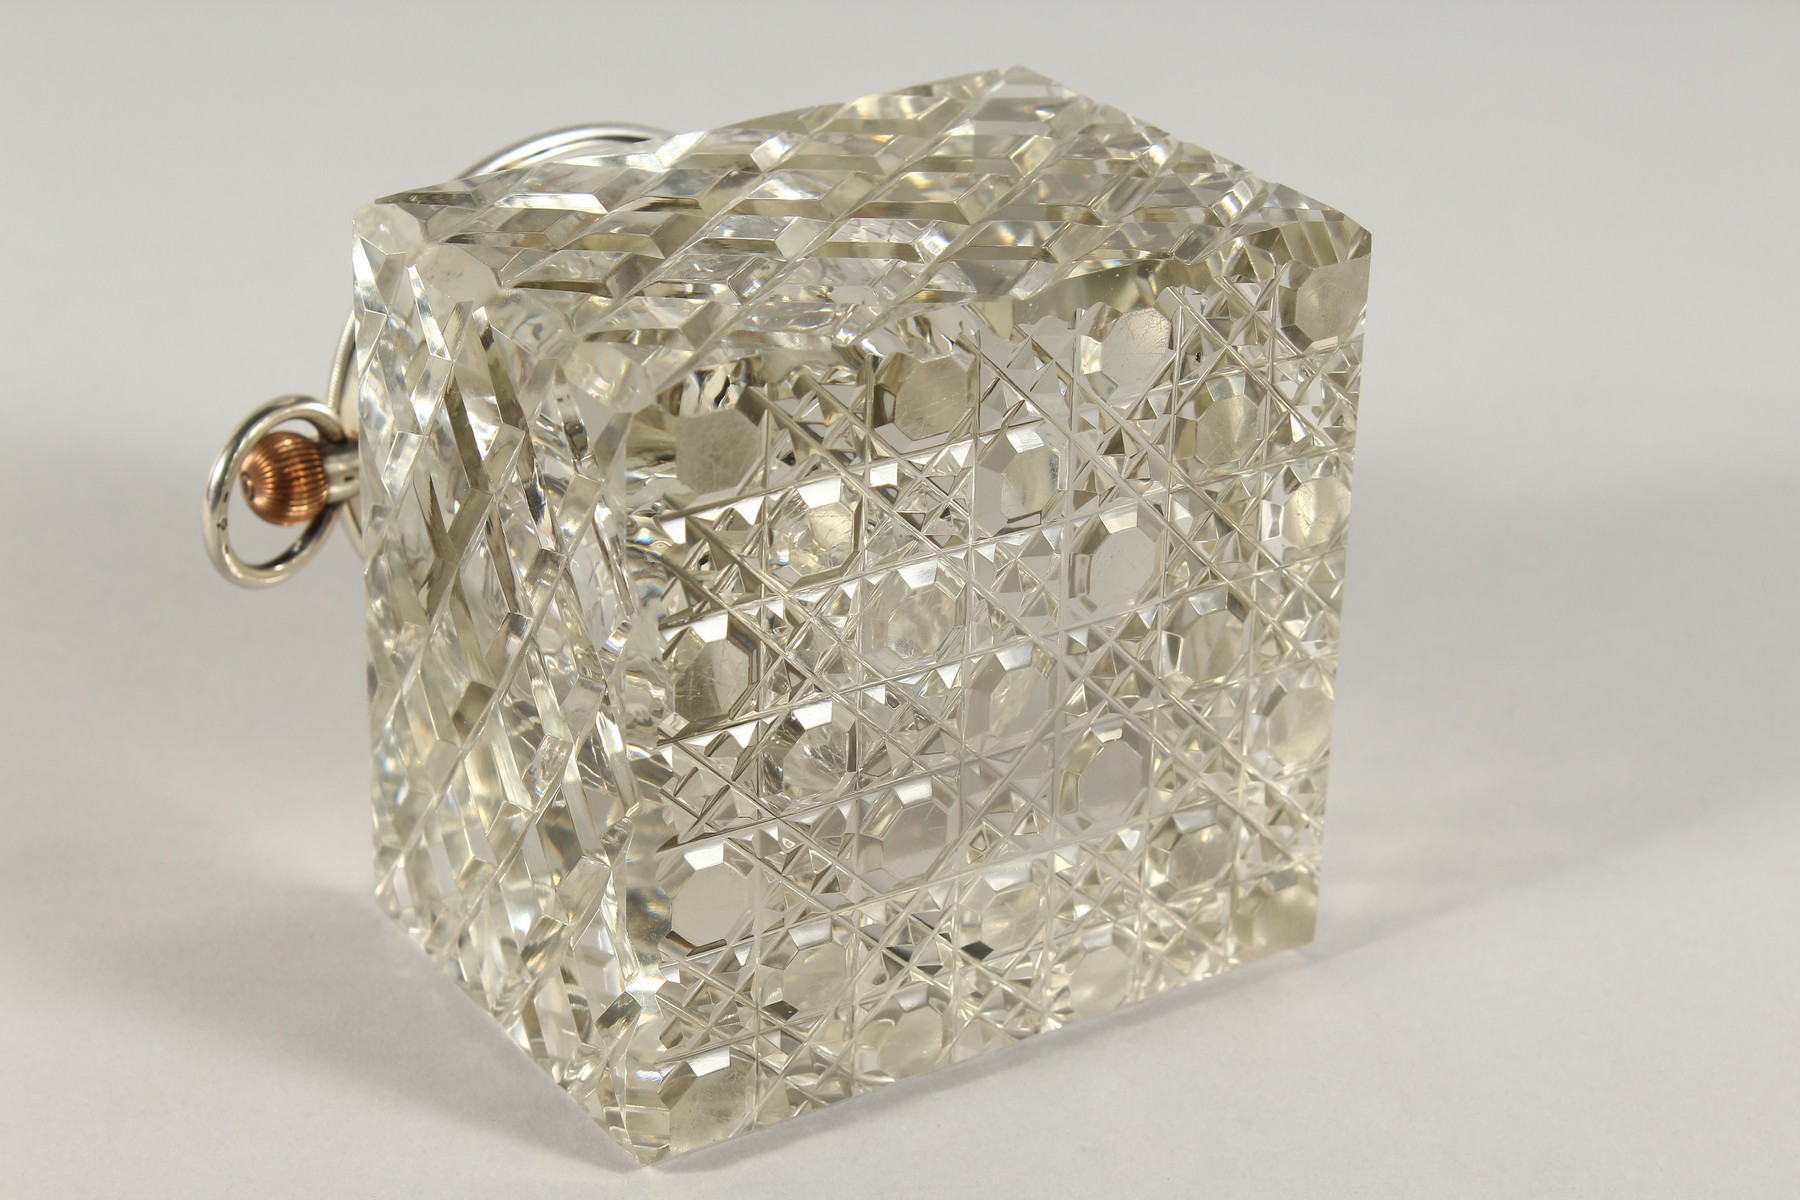 A SILVER AND CUT GLASS SQUARE INKSTAND, the top inset with a watch. 4ins square. London 1903. - Image 5 of 5